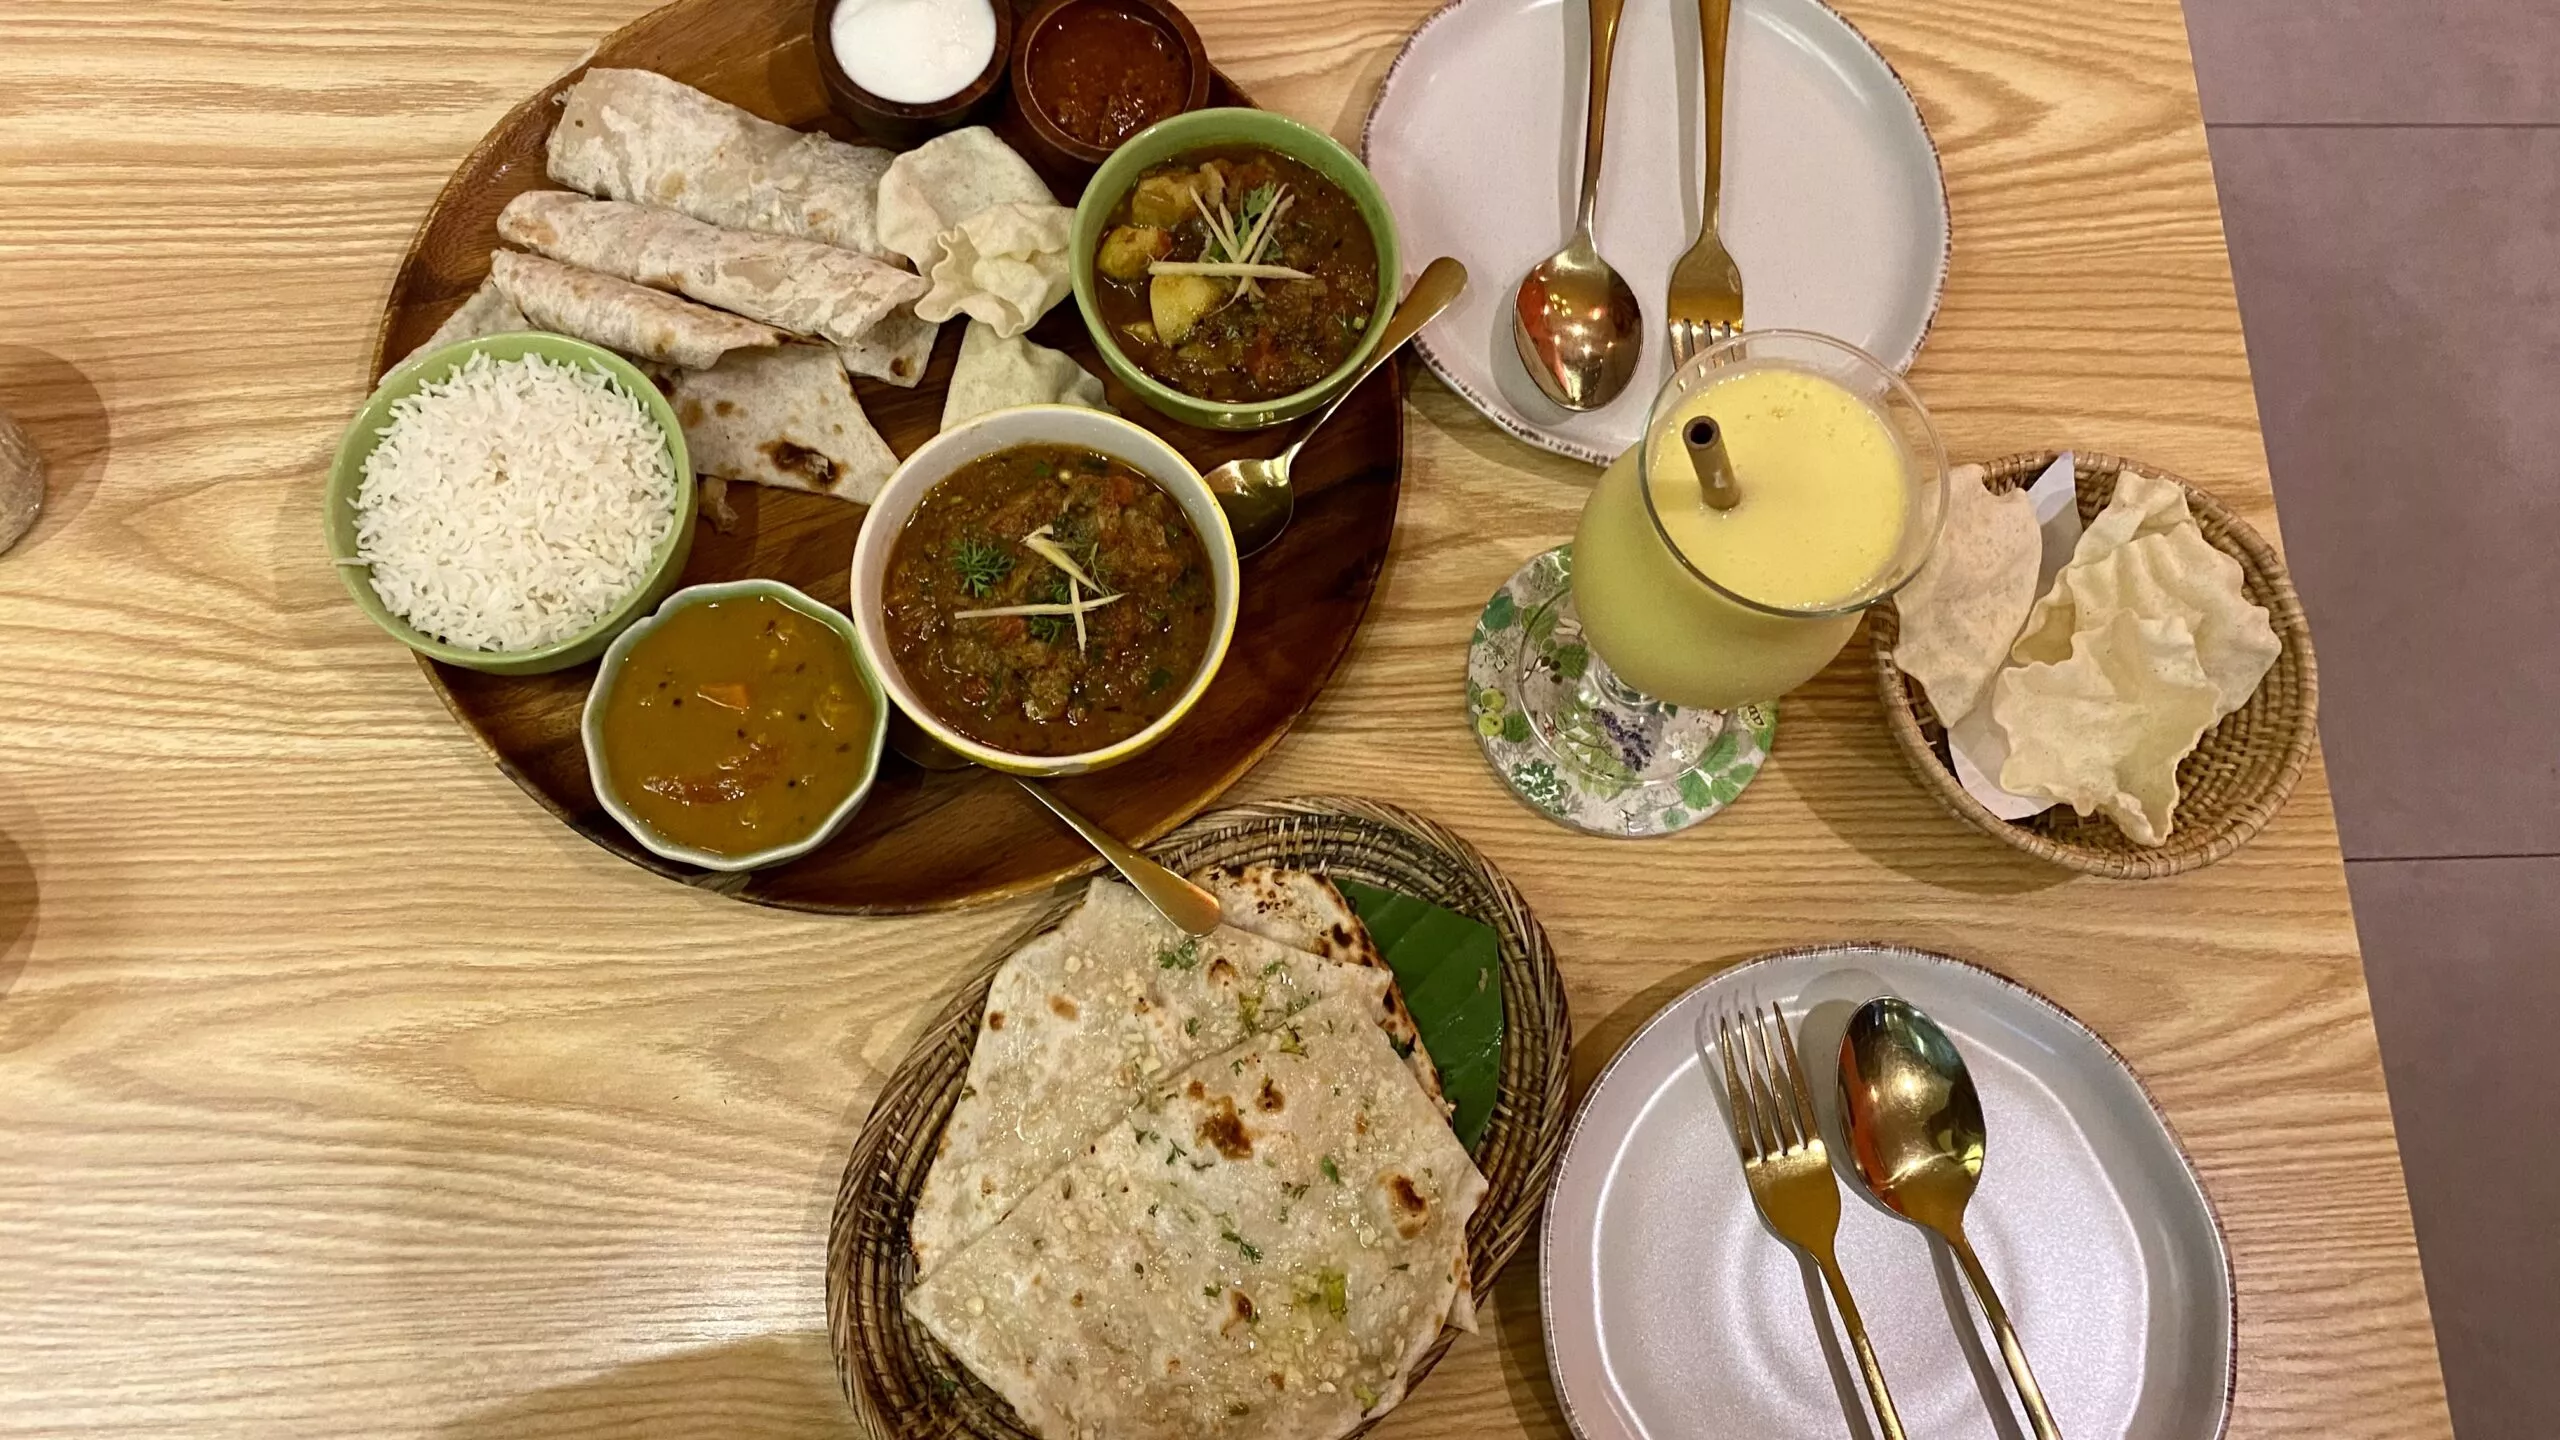 Up view on delicious Indian plate with roti, rice, mango lassy and and sauces